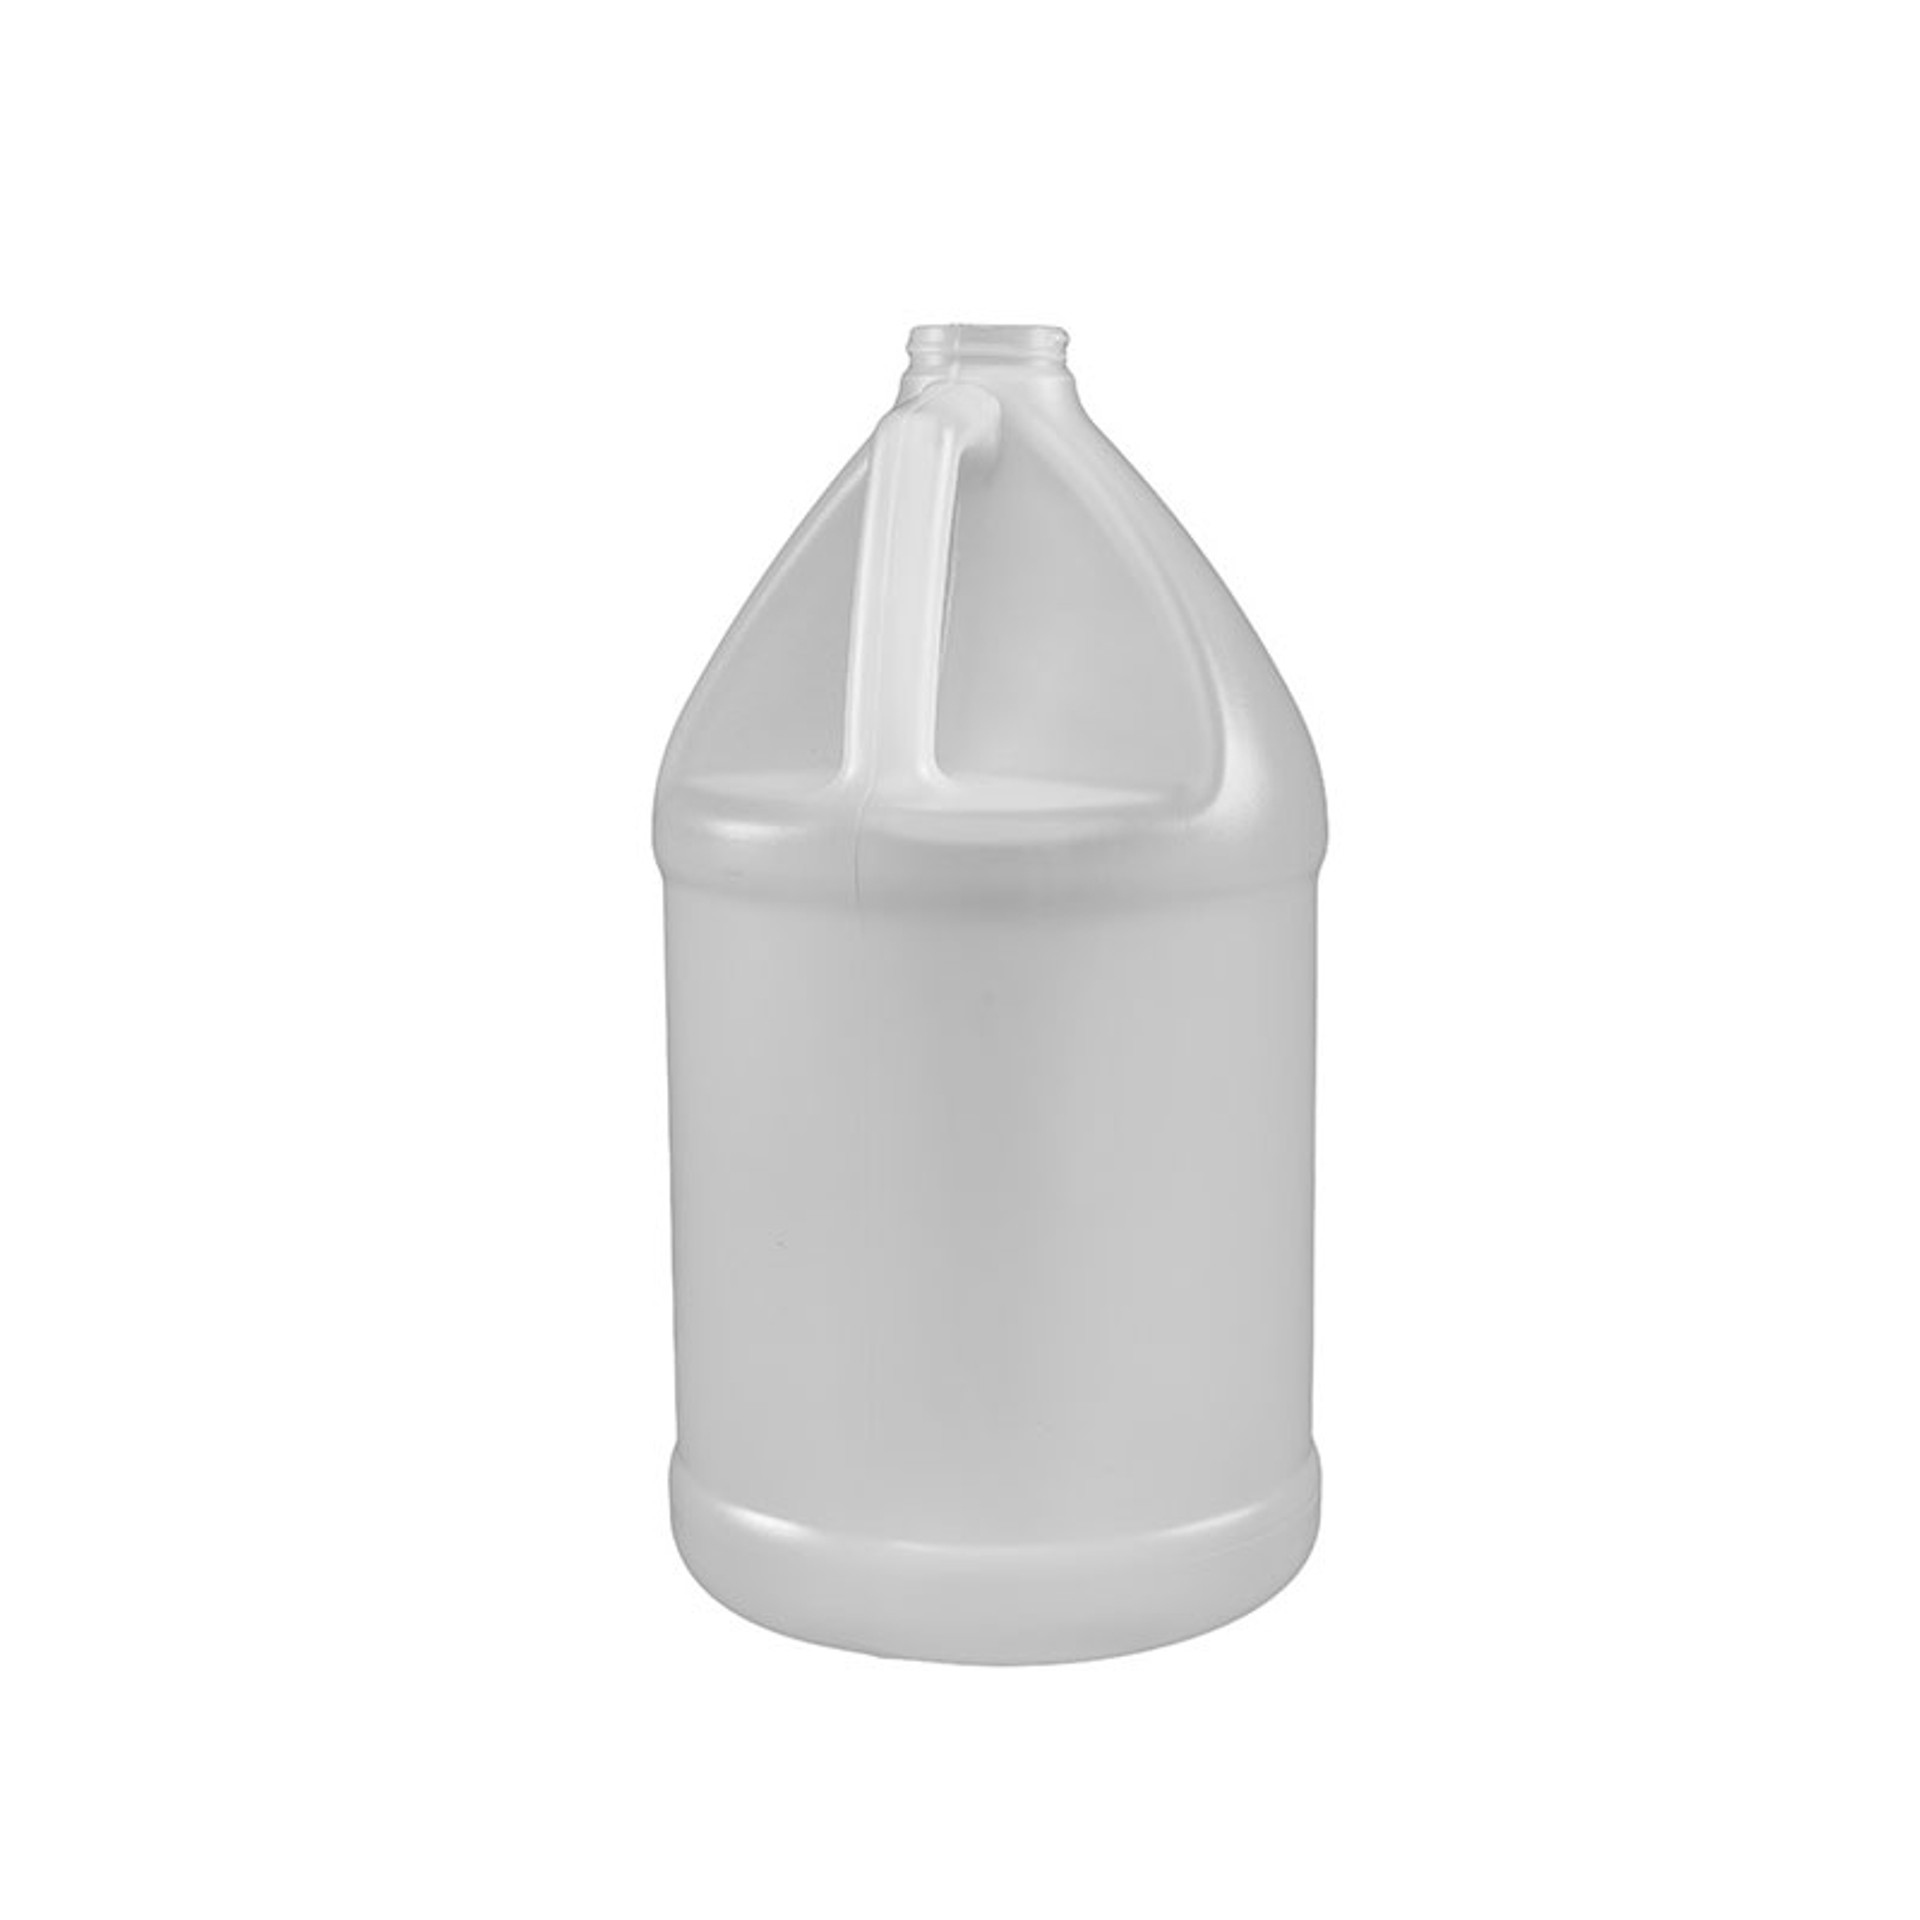 https://cdn11.bigcommerce.com/s-znjh1s2dil/images/stencil/1920w/products/298/719/1-gal-plastic-bottle__00745.1681768783.jpg